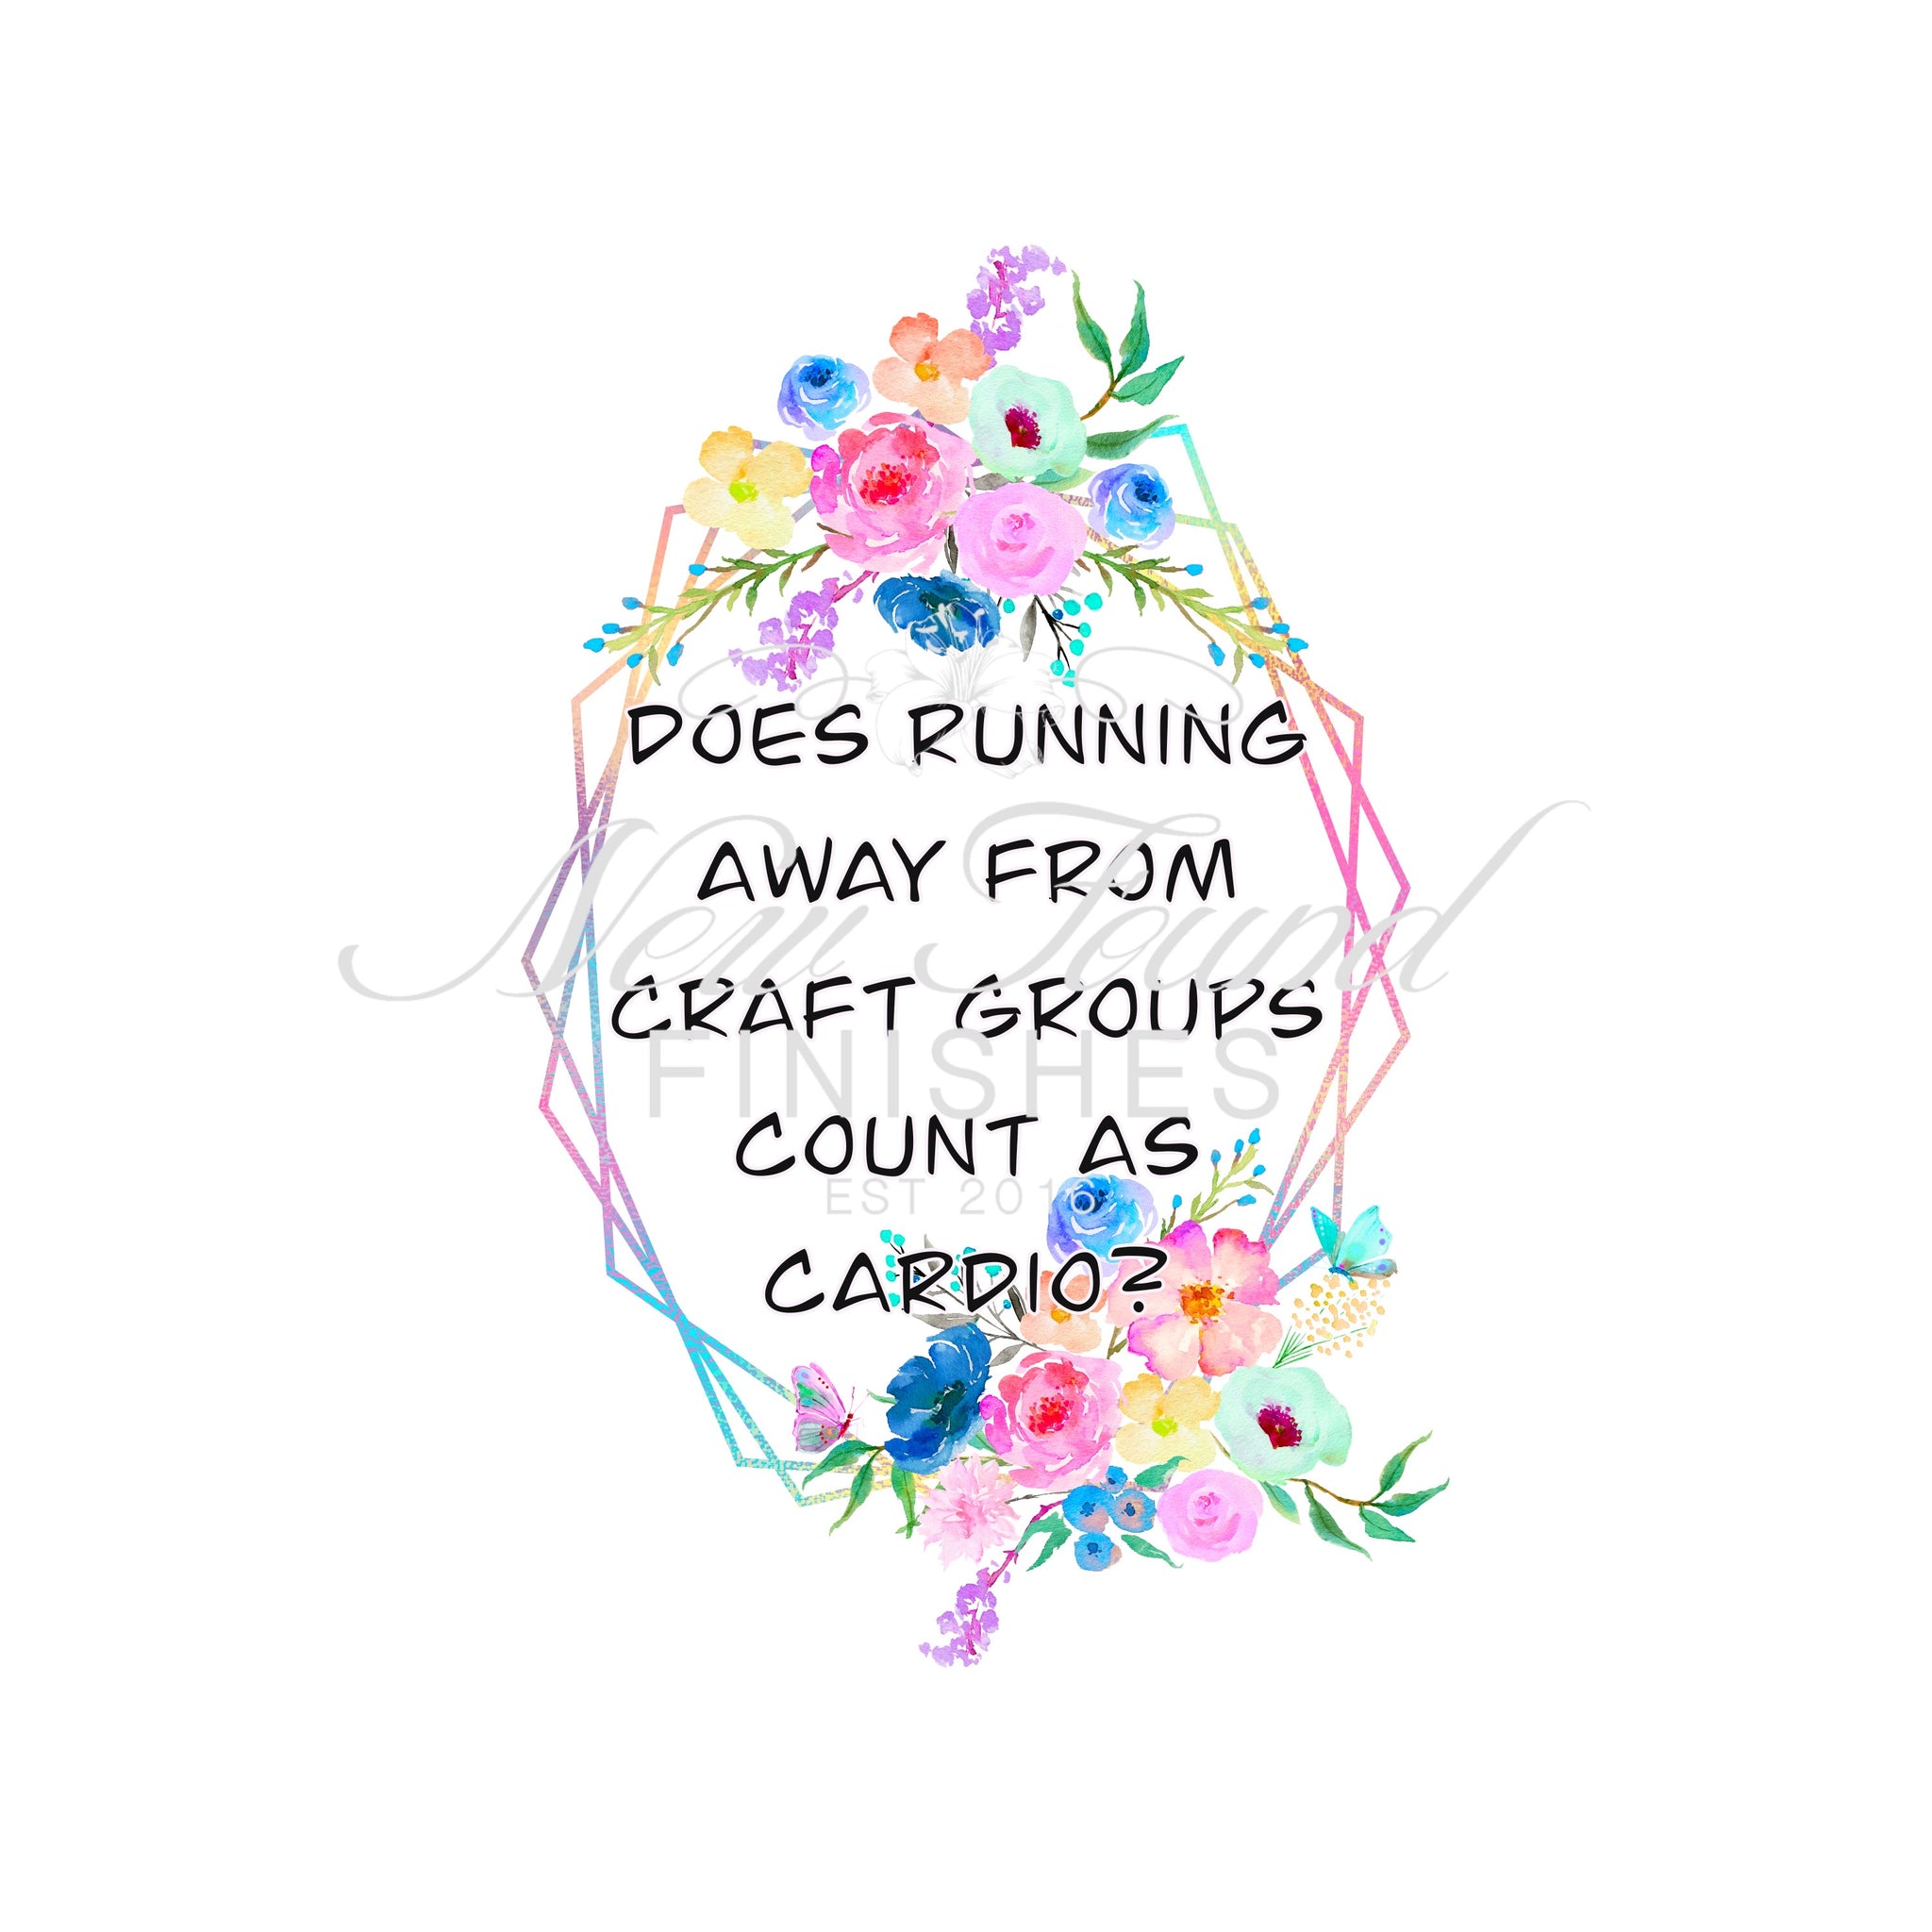 Does running away from craft groups count